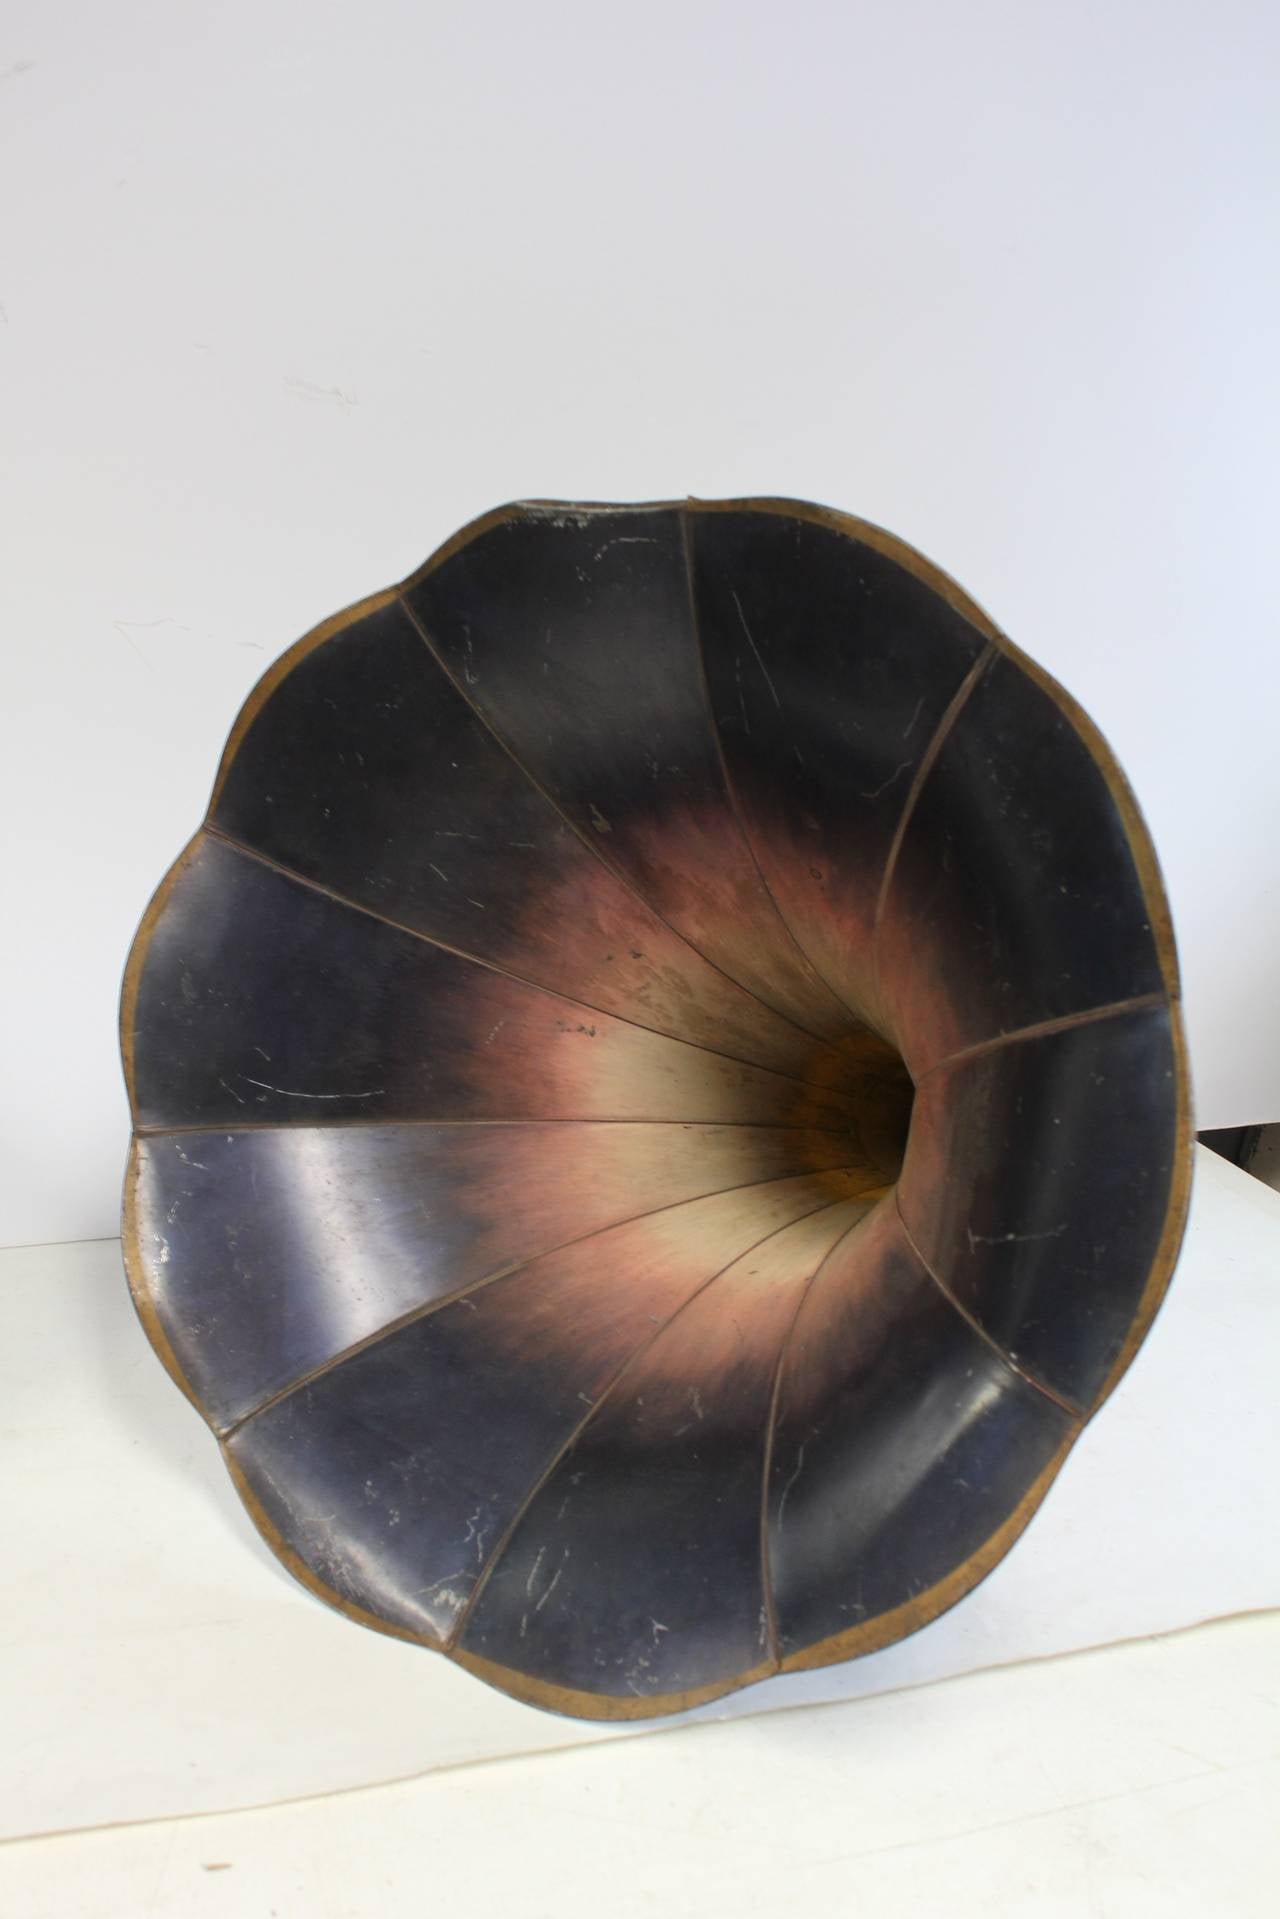 gramophone horn for sale